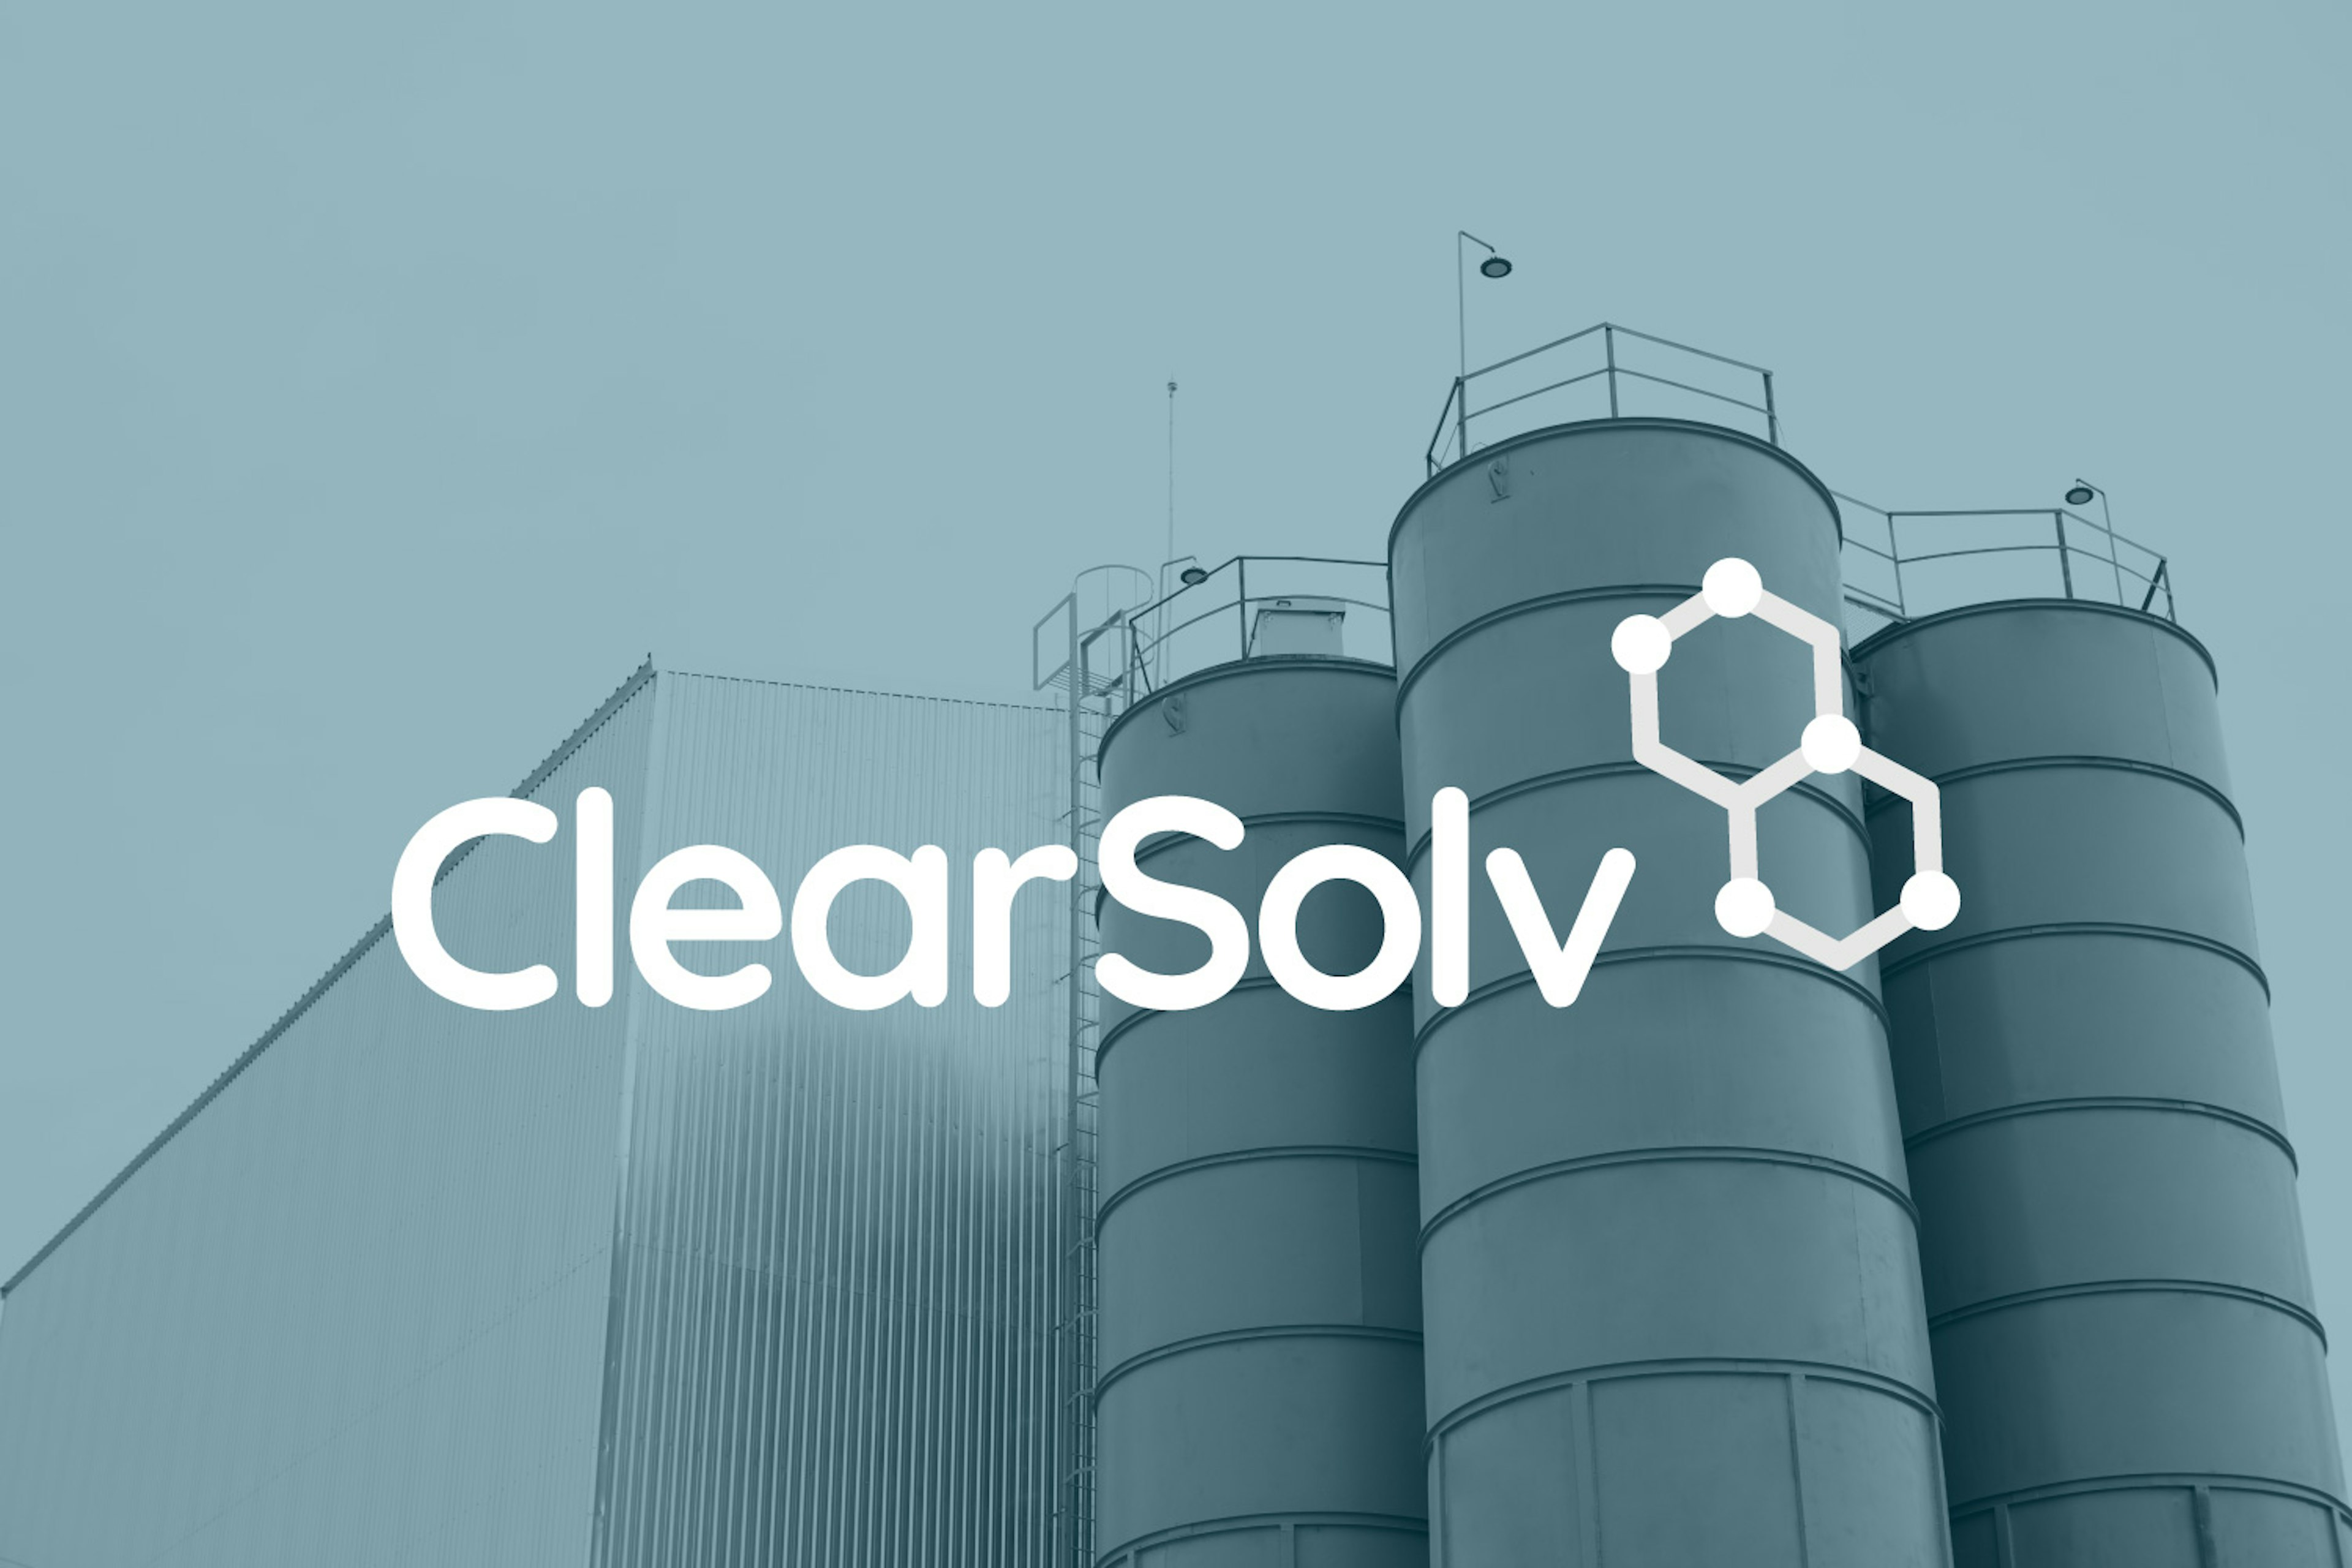 Creating a brand for a new chemical company